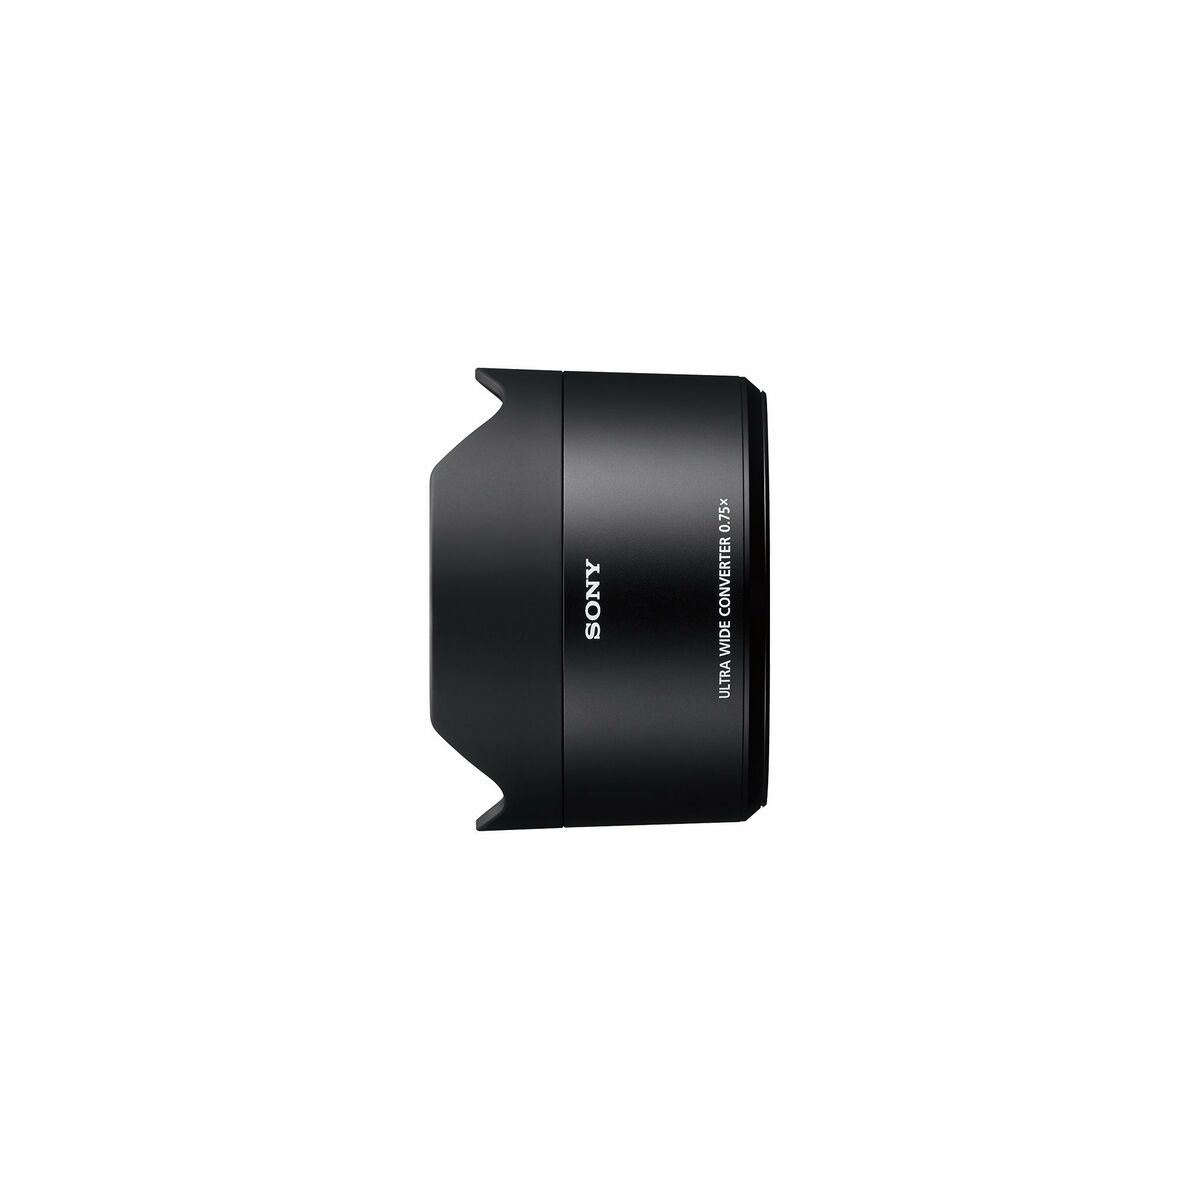 Converter/Adapter Sony SEL075UWC, Sony, Electronics, Photography and video cameras, converter-adapter-sony-sel075uwc, Brand_Sony, category-reference-2609, category-reference-2932, category-reference-2936, category-reference-t-19653, category-reference-t-8122, category-reference-t-8123, category-reference-t-8155, Condition_NEW, ferretería, fotografía, Price_300 - 400, travel, RiotNook